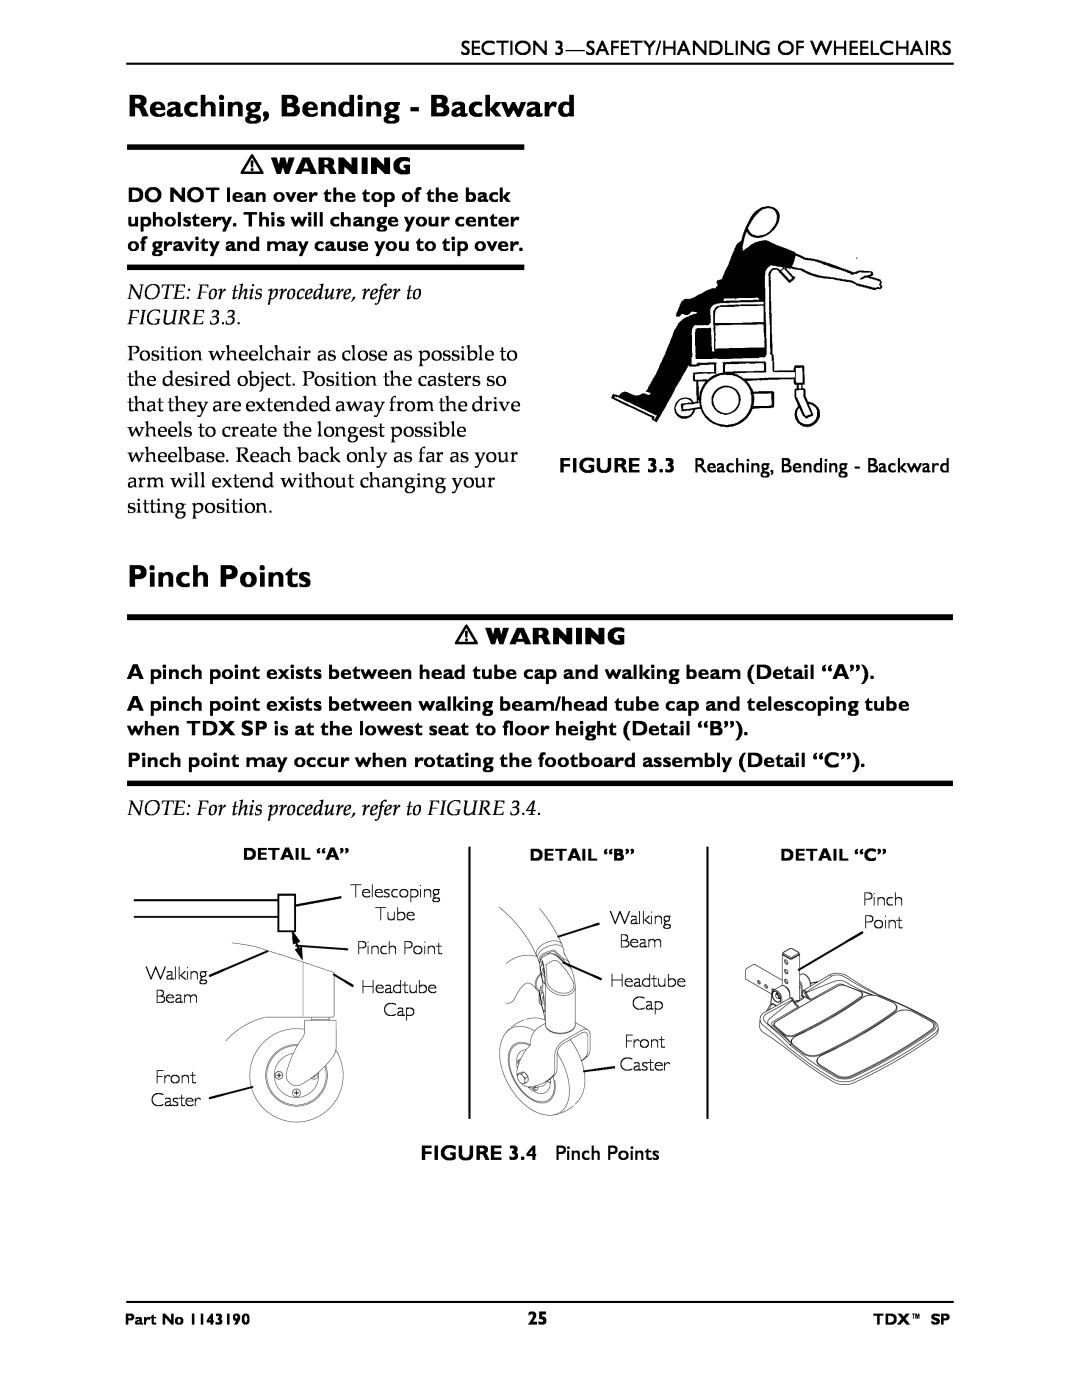 Invacare SP manual Reaching, Bending - Backward, Pinch Points, NOTE For this procedure, refer to 